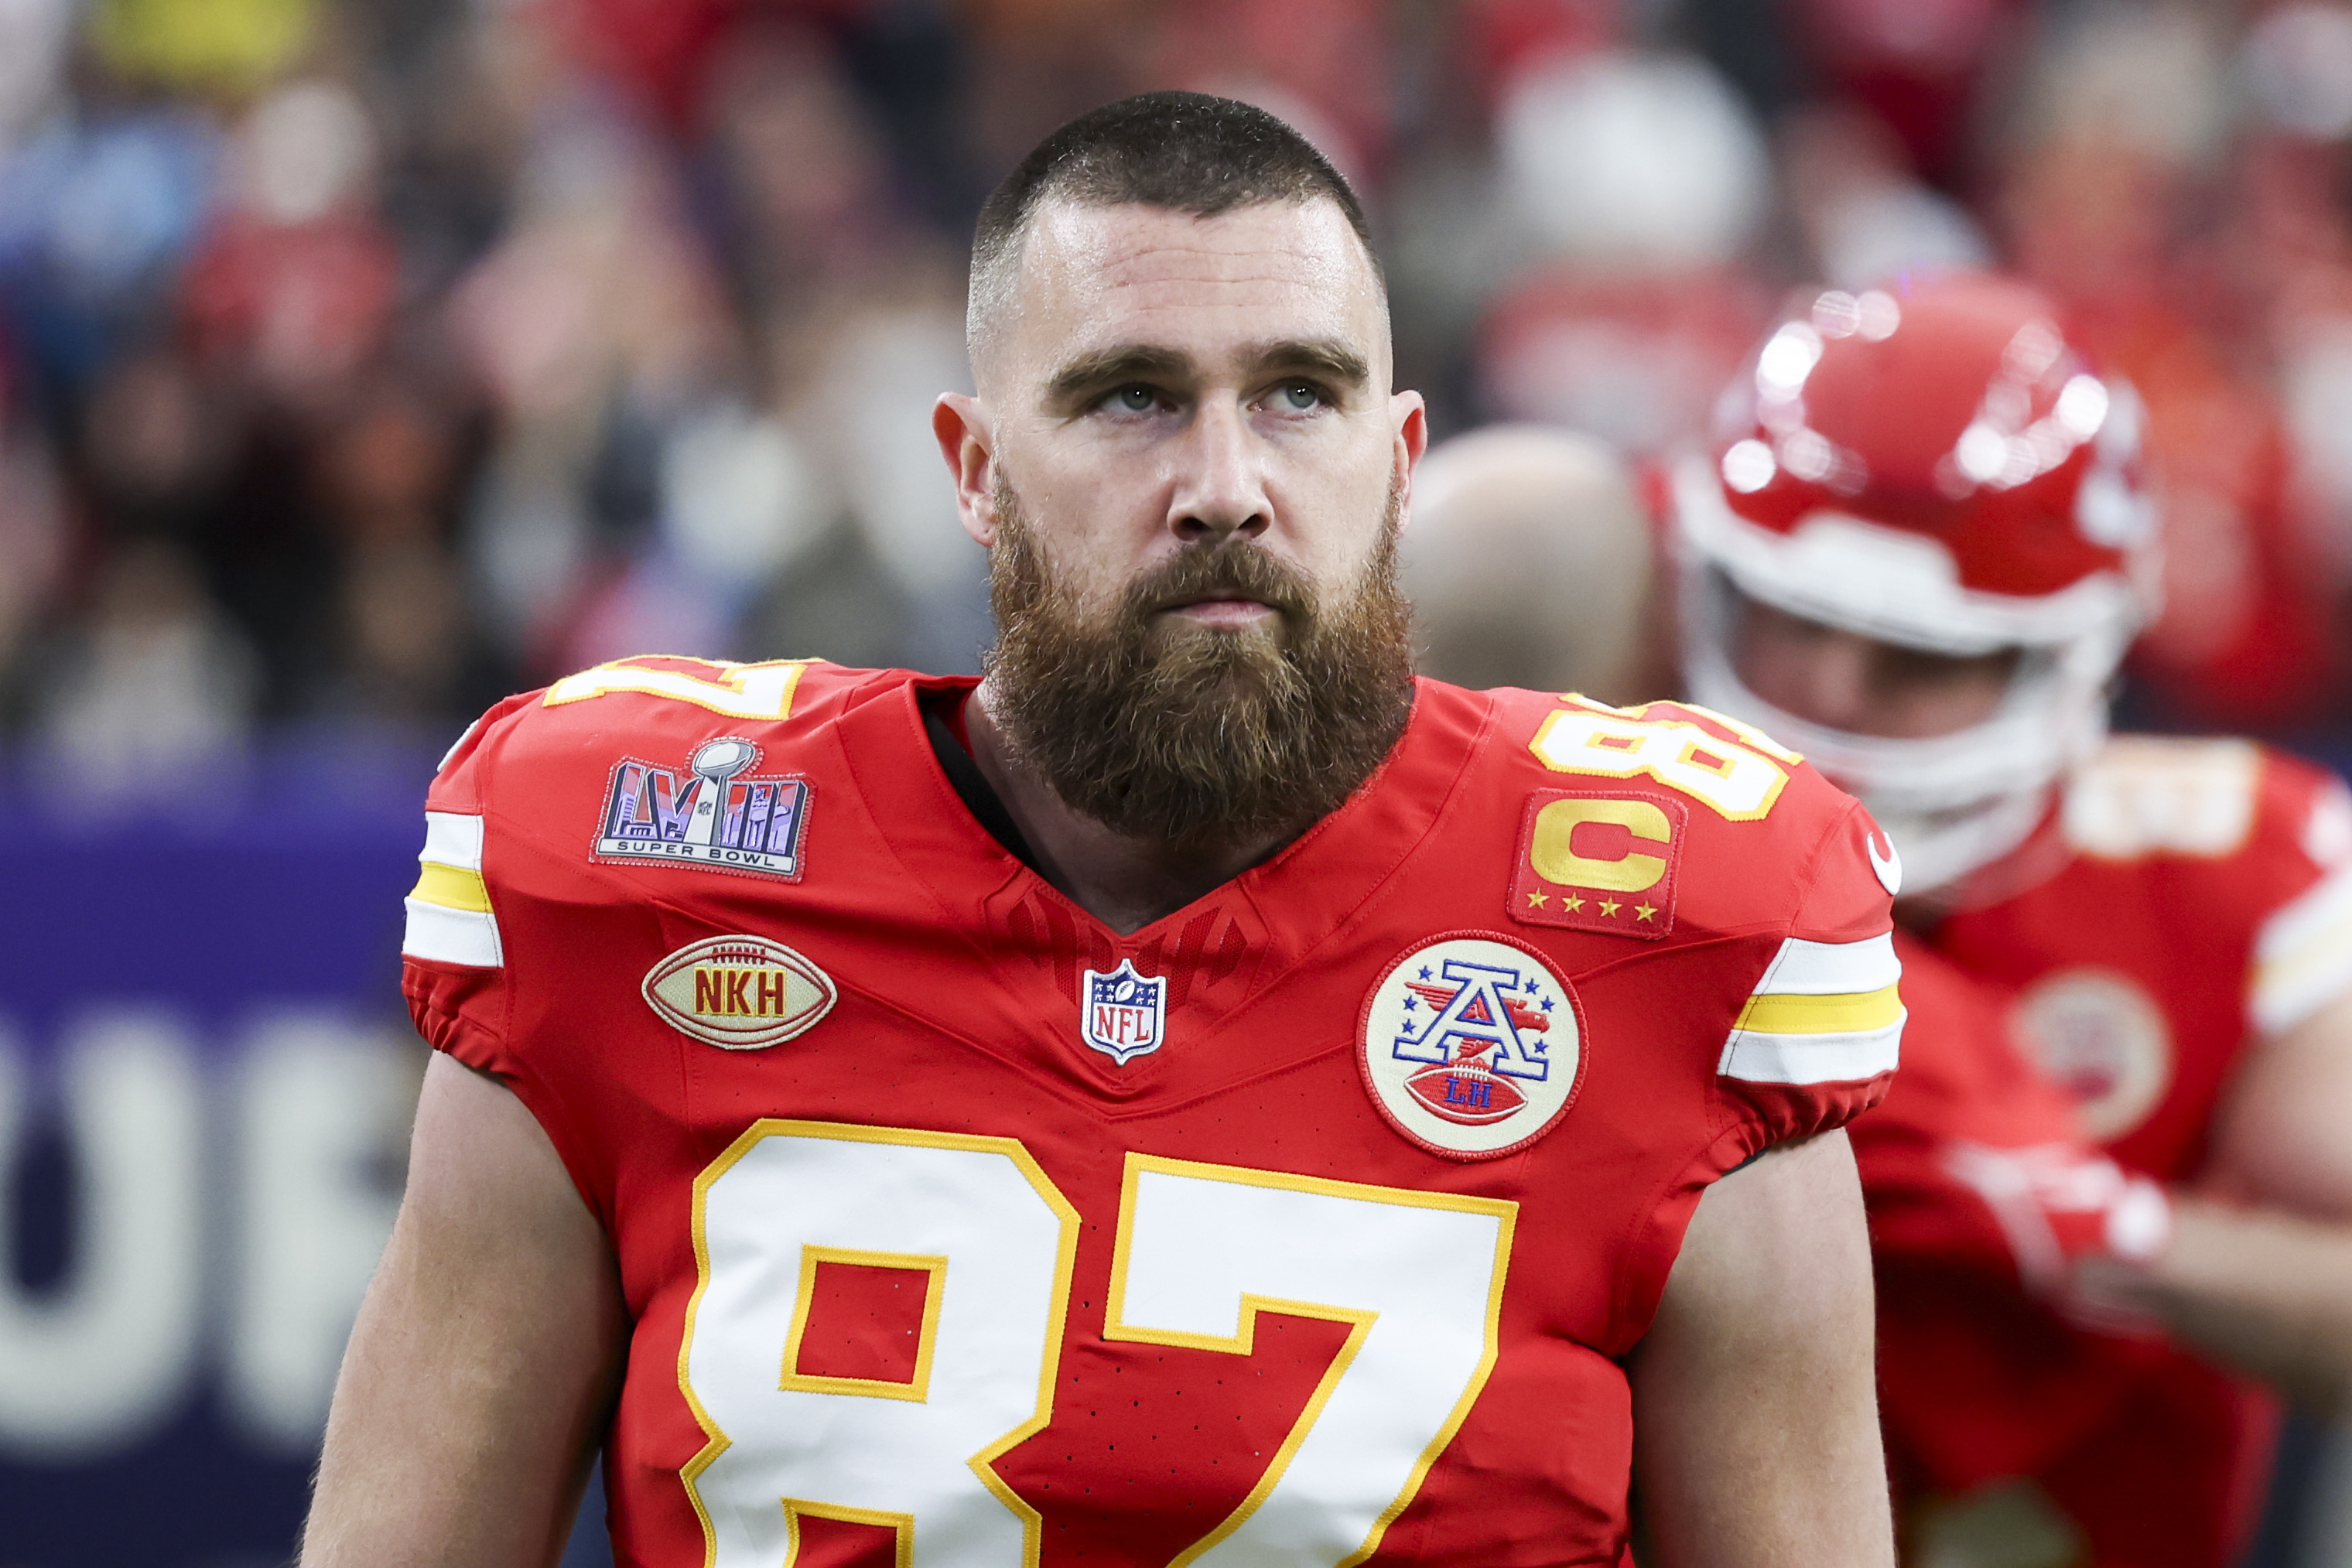 Travis Kelce in a football uniform with the number 87 during a game for the Kansas City Chiefs